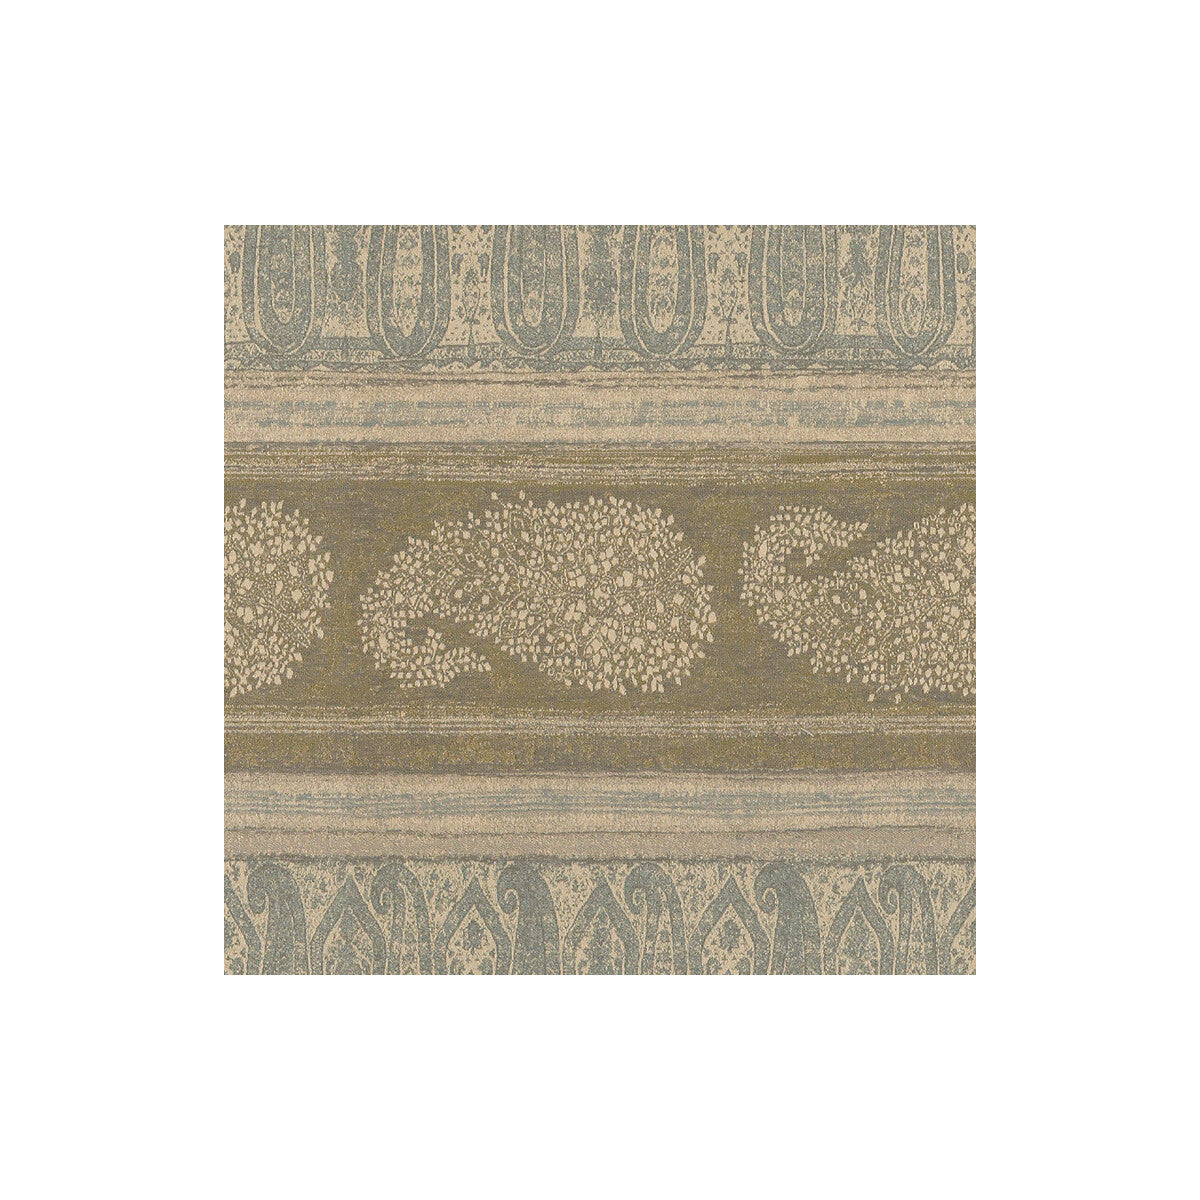 Out Of India fabric in mineral color - pattern 31321.1615.0 - by Kravet Couture in the Modern Colors II collection